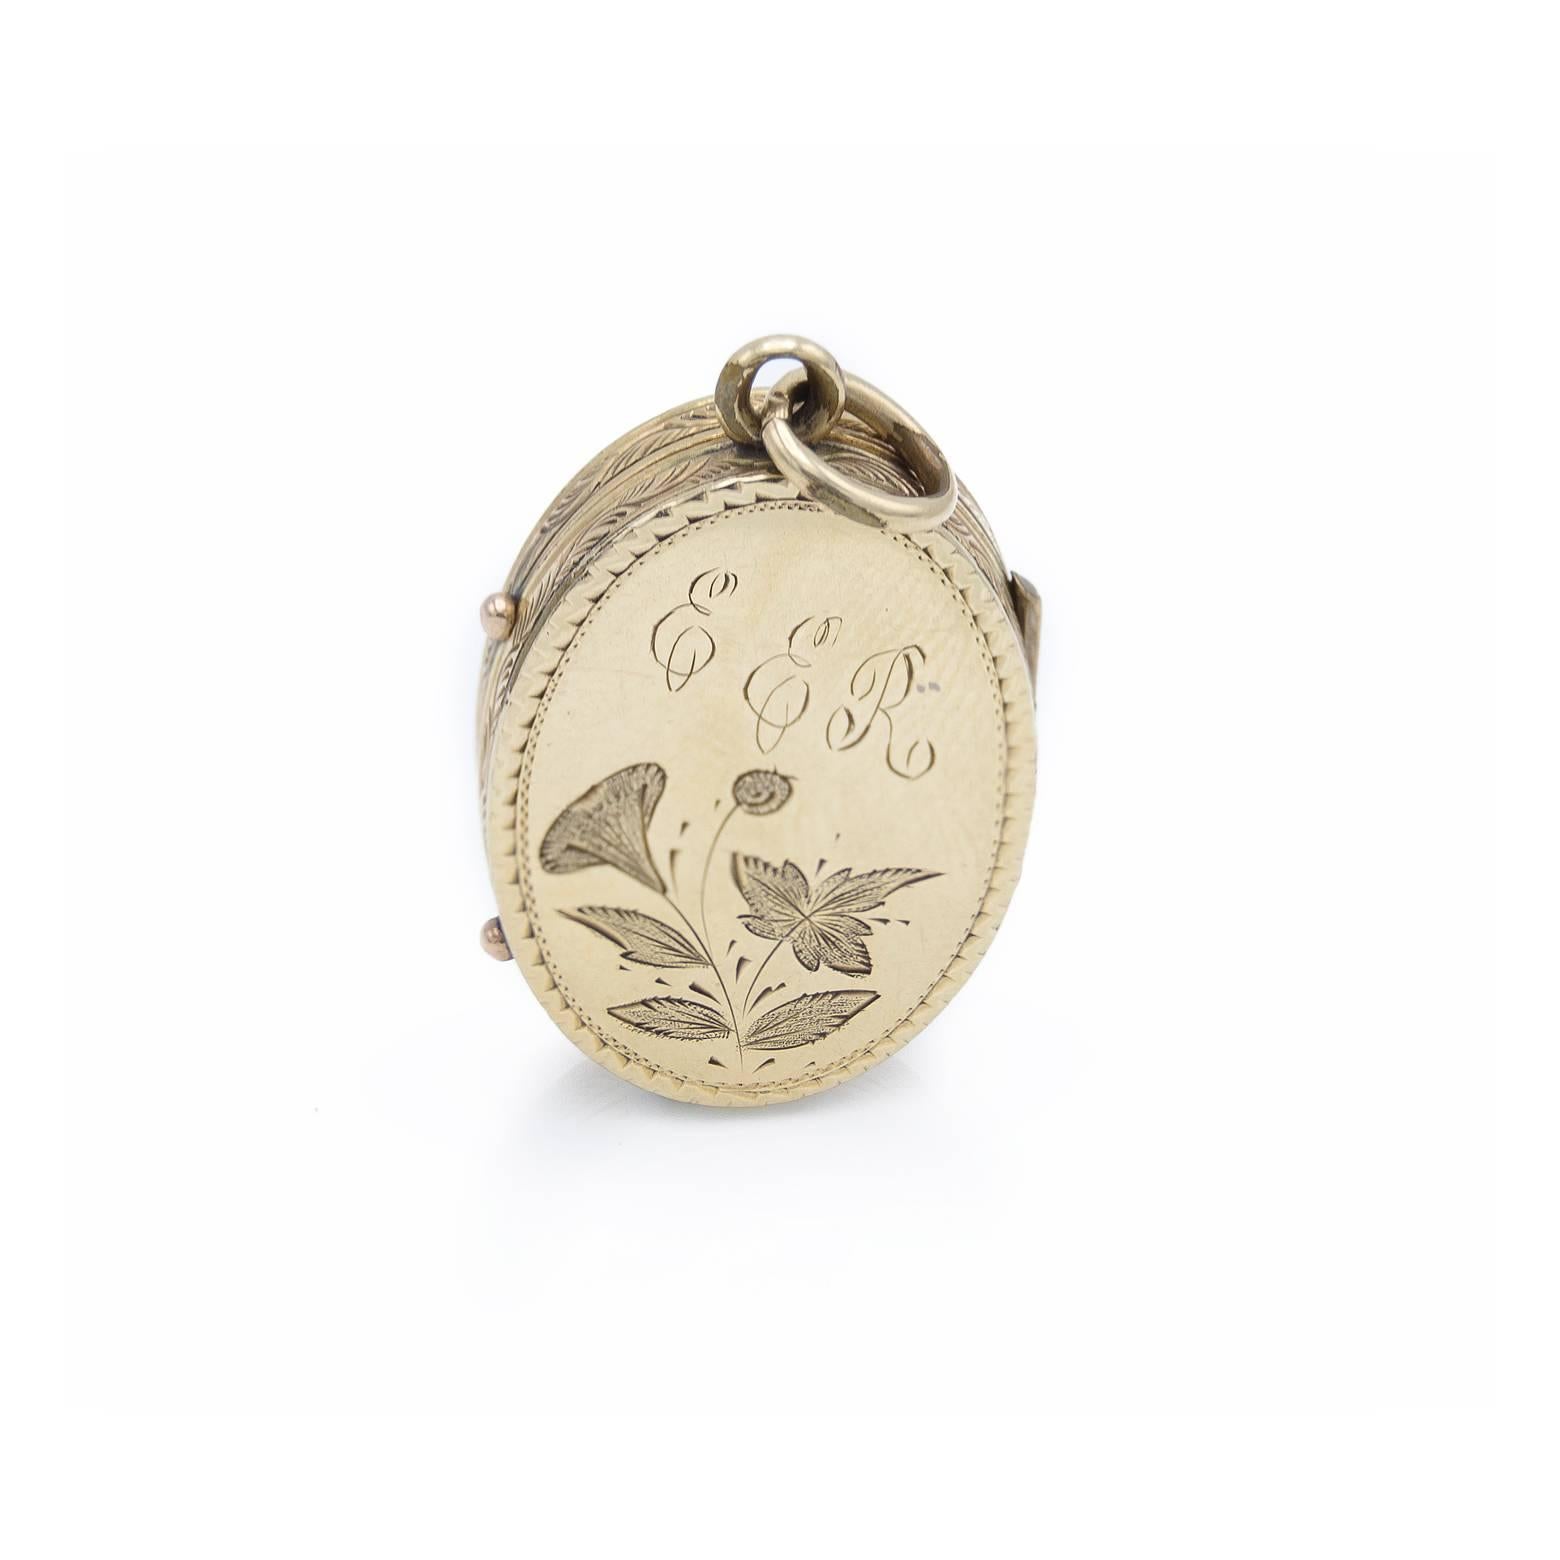 In pristine condition this antique locket is engraved with flowers, leaves, a daisy and a lily. Most likely made in the 1930s, it comes with the two original photos in them. The locket is engraved with the initials EER and is playful yet elegant,